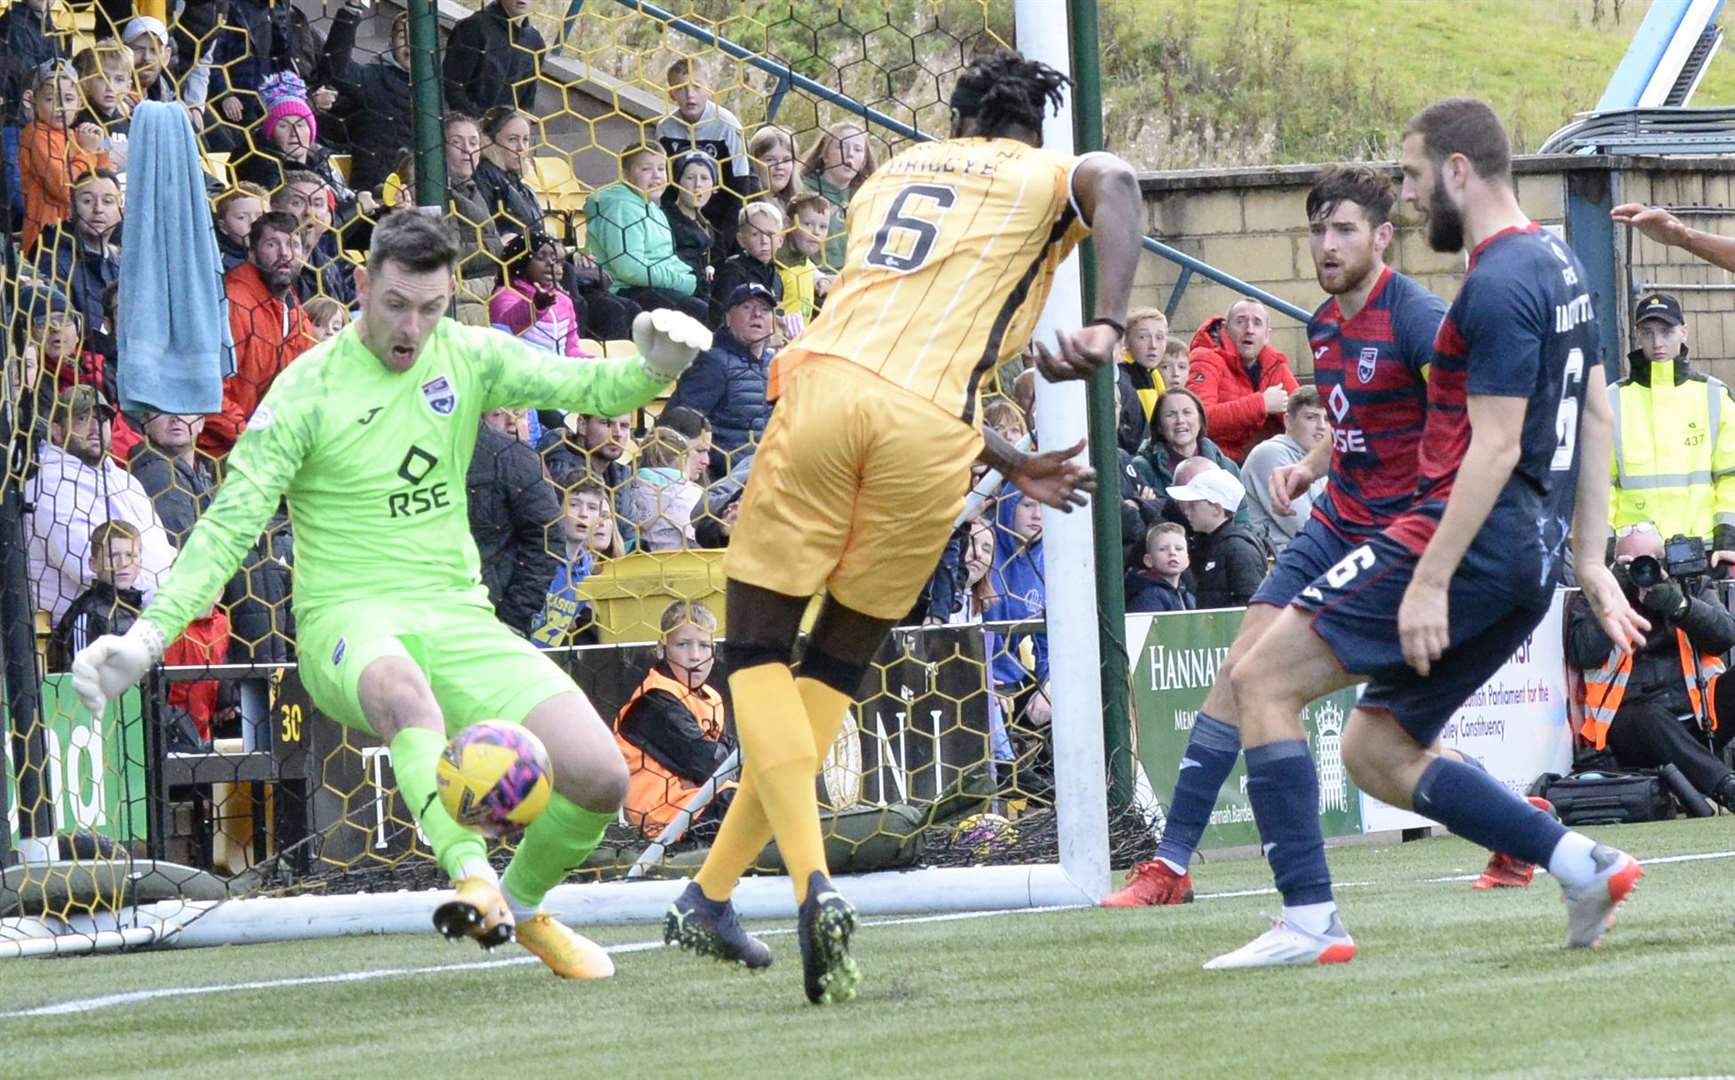 A super save from Ross County 'keeper Ross Laidlaw as he blocks a goal-bound shot from Livingston's Ayo Obileye. Picture: Callan Media.